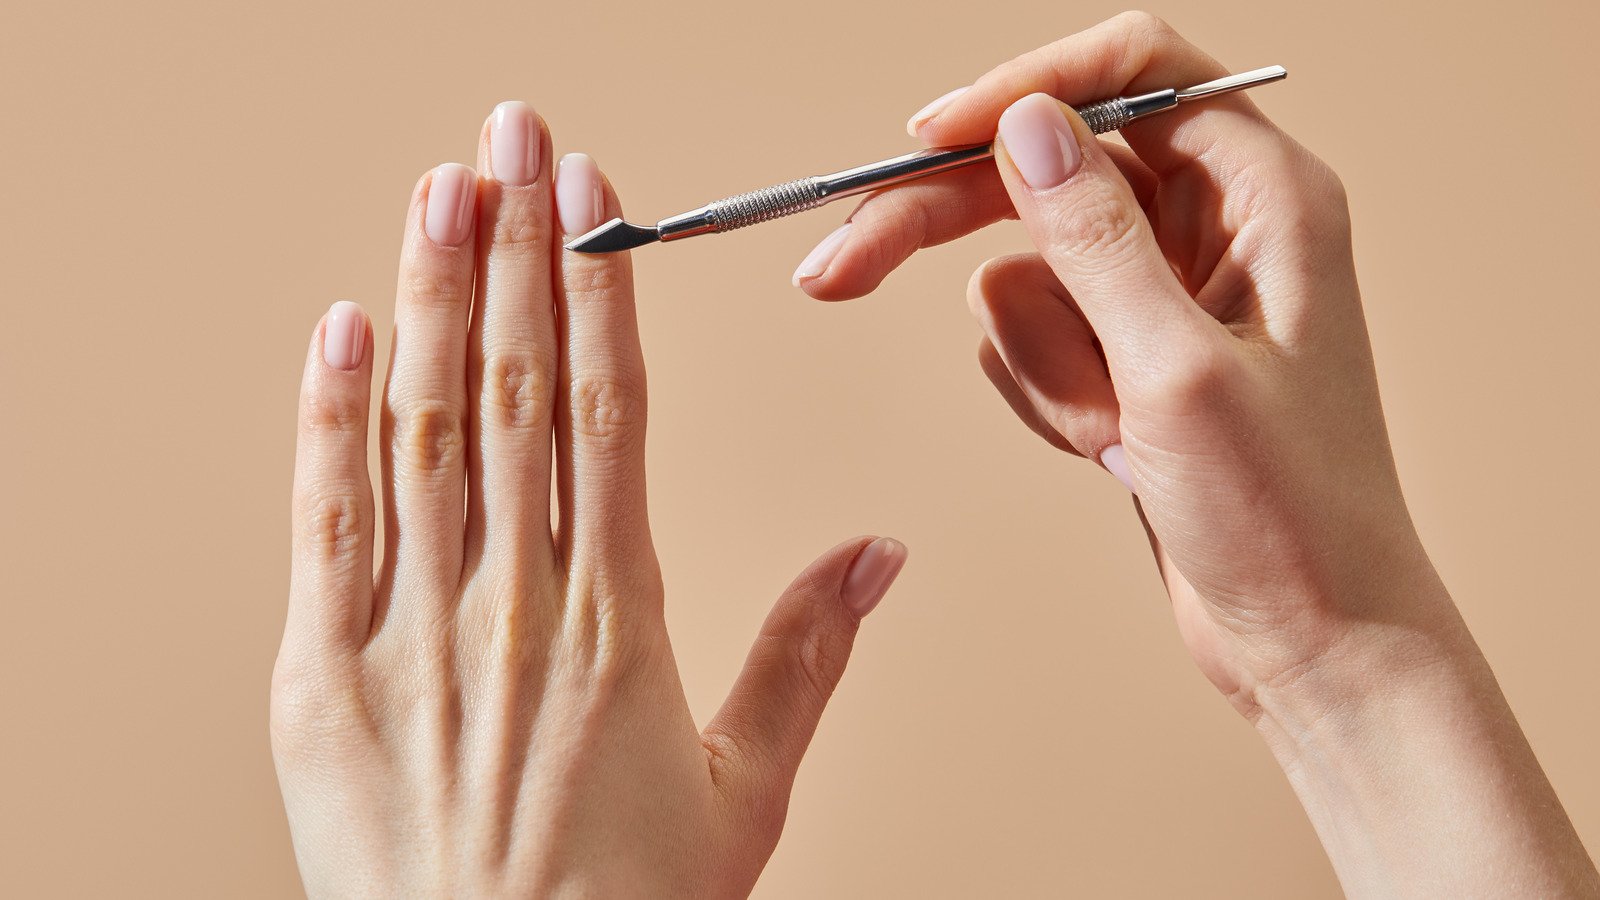 A image of metal cuticle pusher